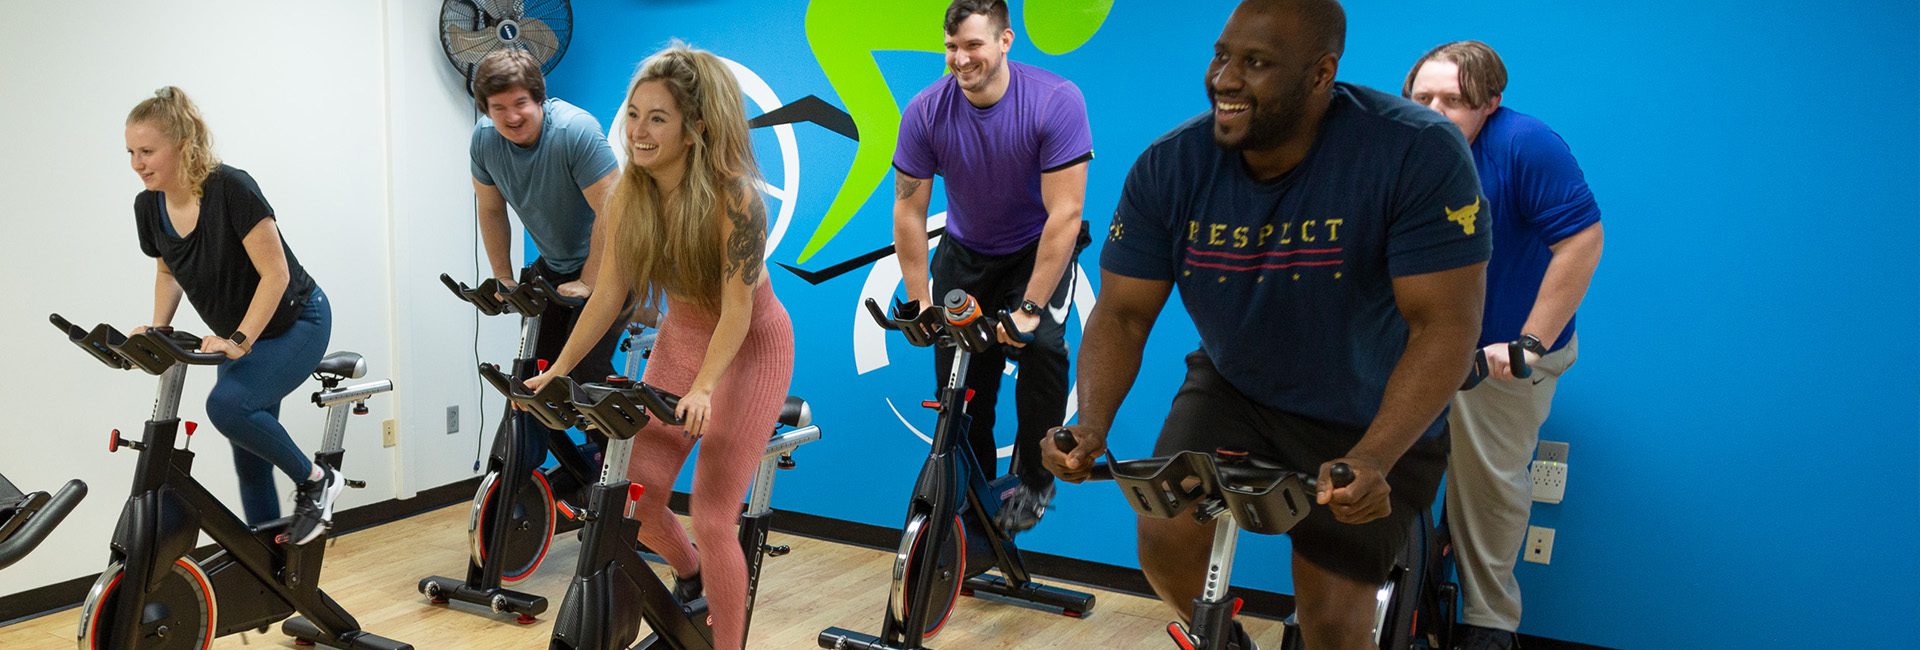 group cycling class studio at a gym in everett